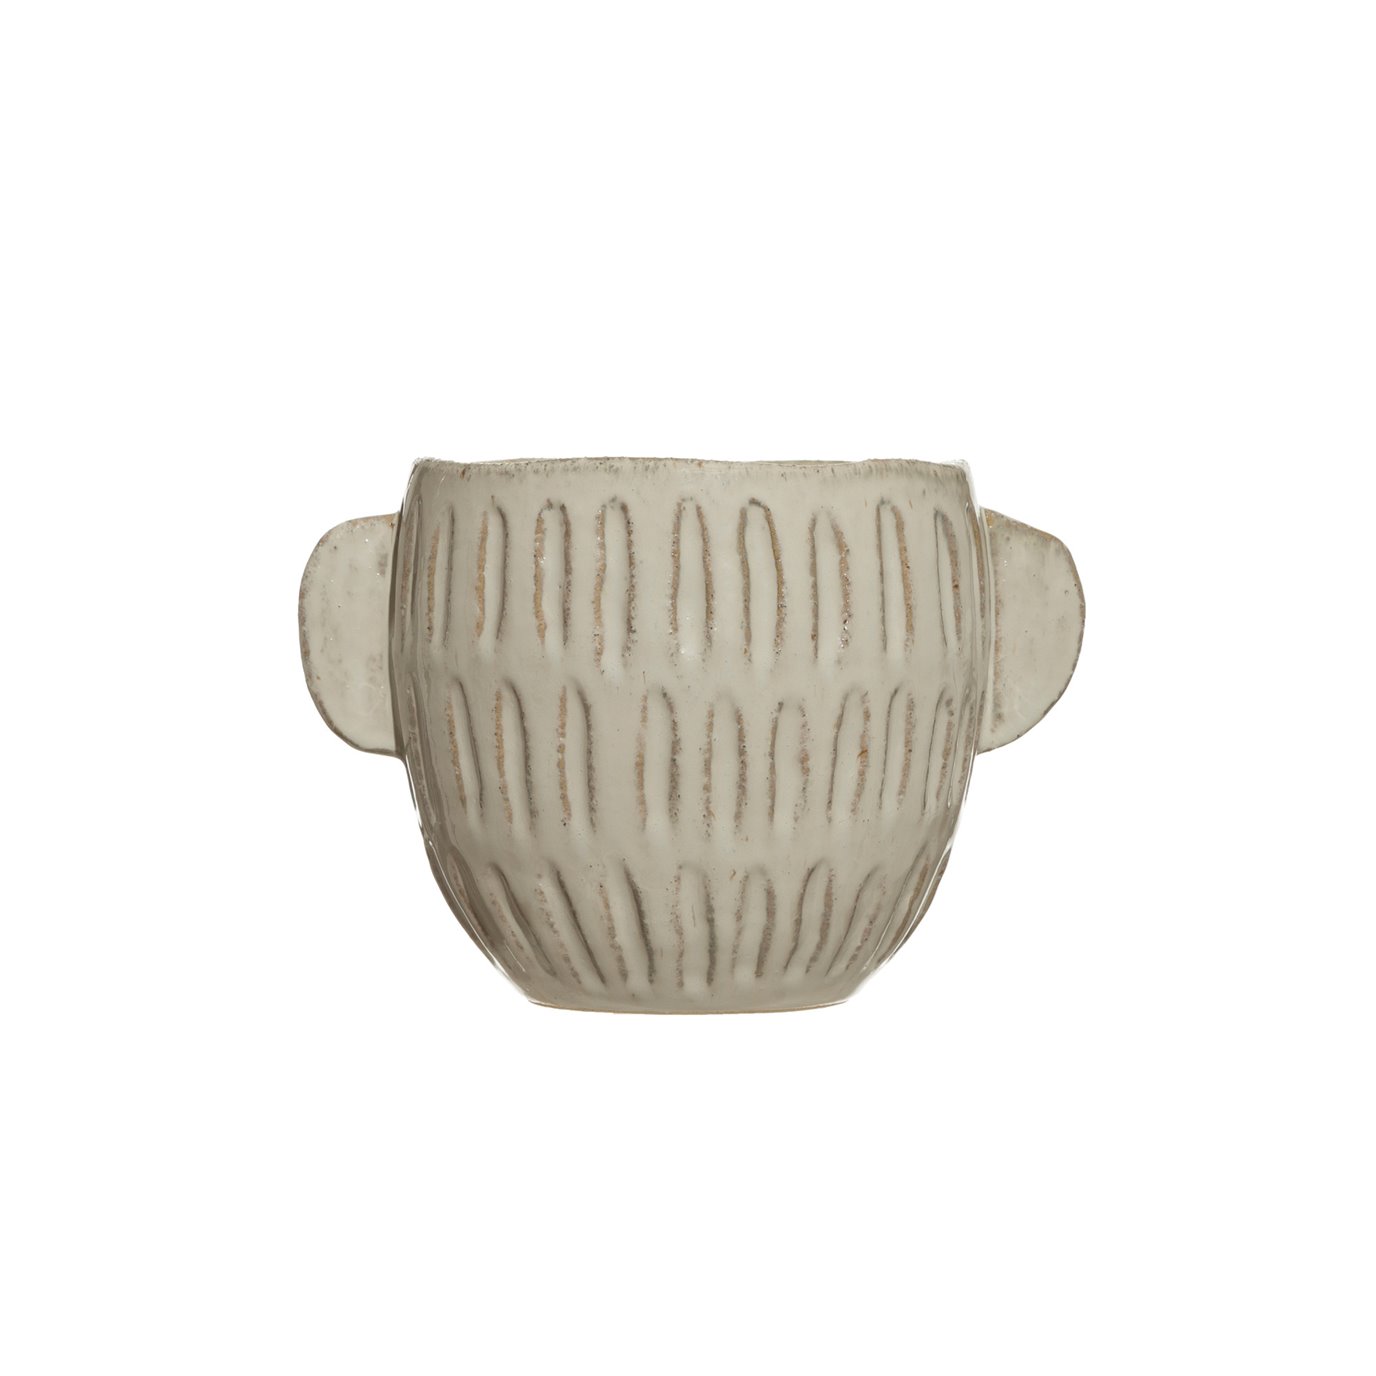 Embossed Stoneware Planter with Reactive Glaze Finish (Holds 7" Pot/Each one will vary)